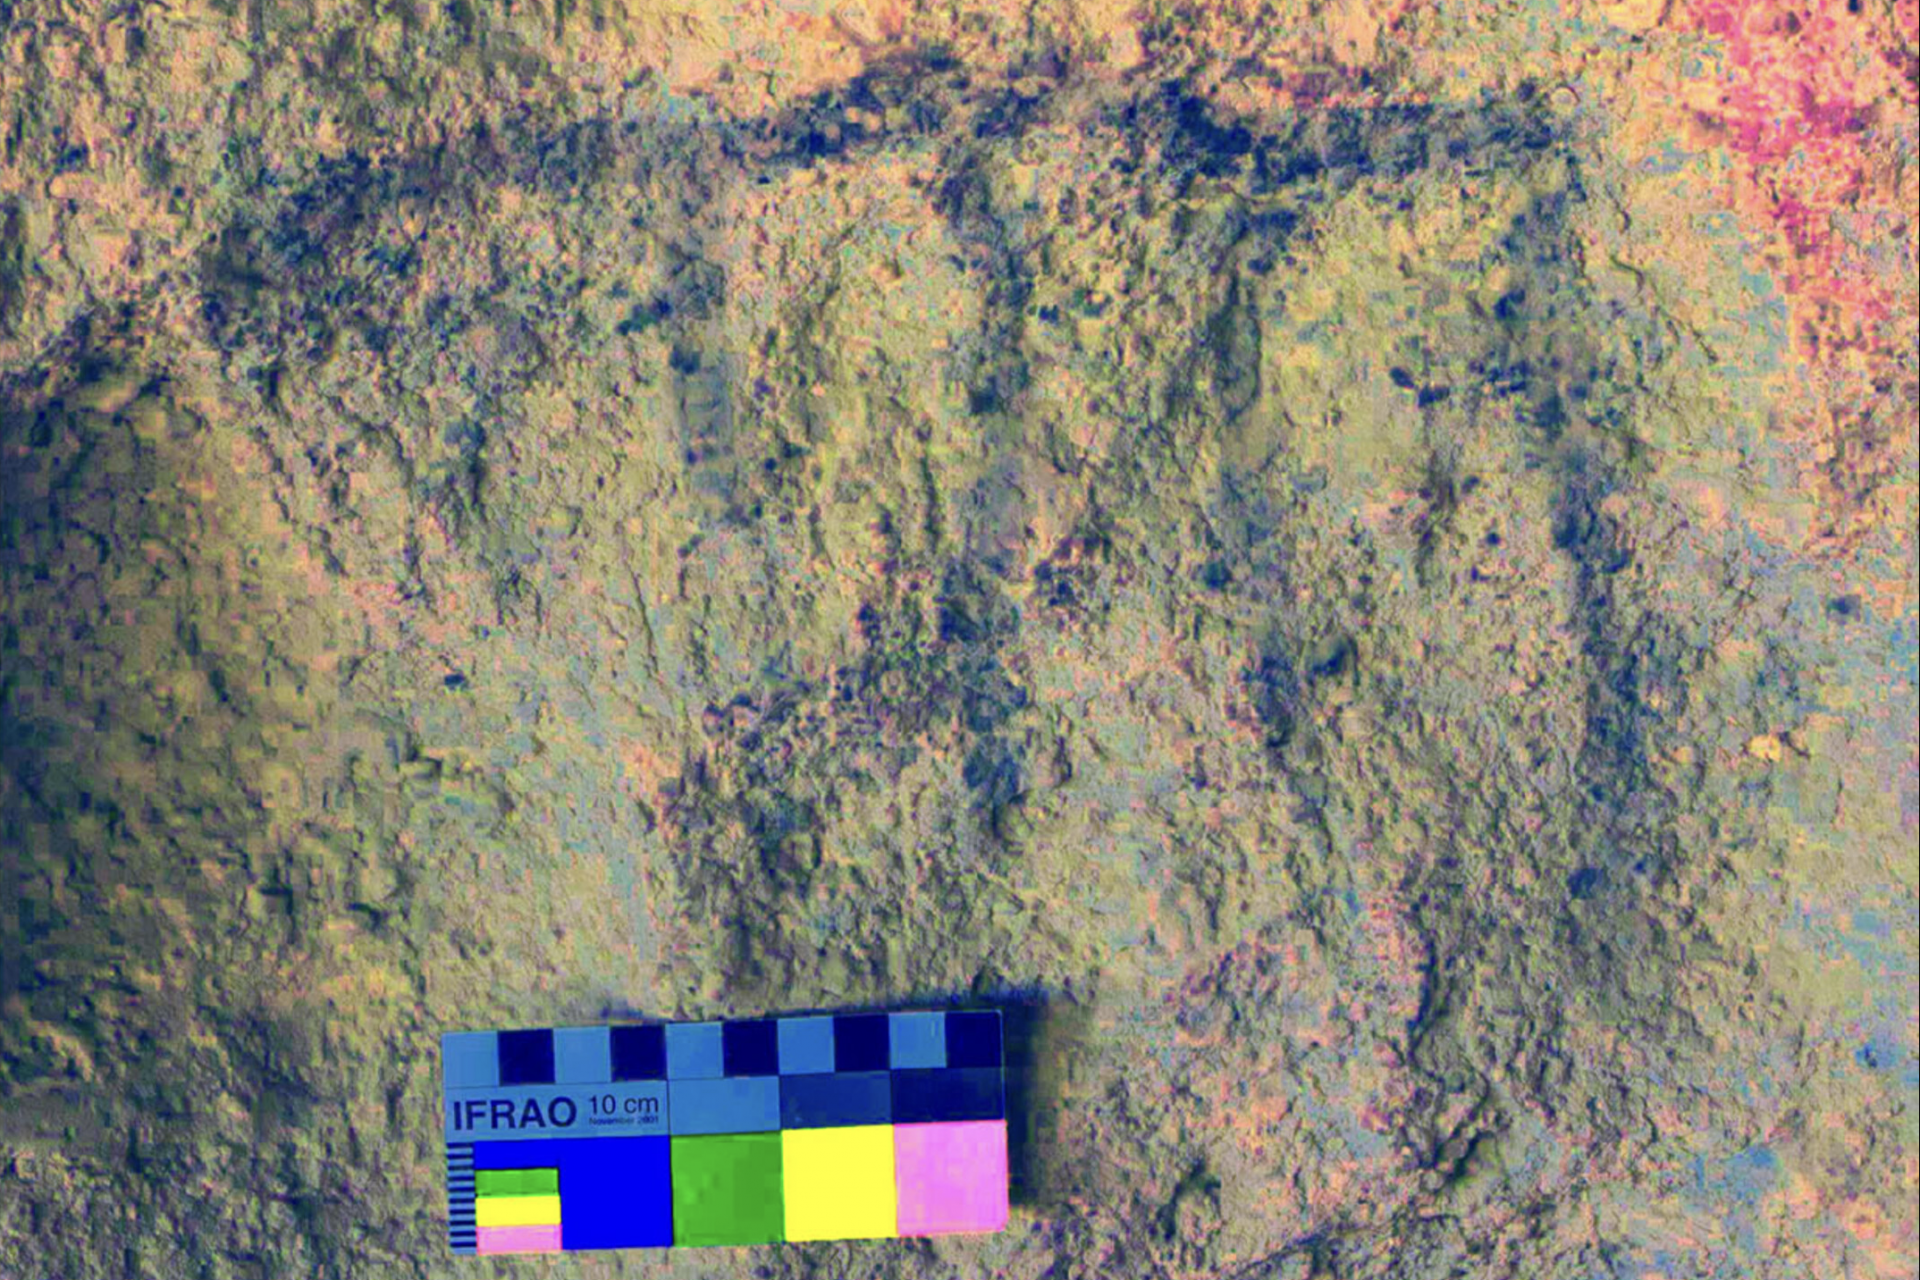 Four comb-like patterns were dated 